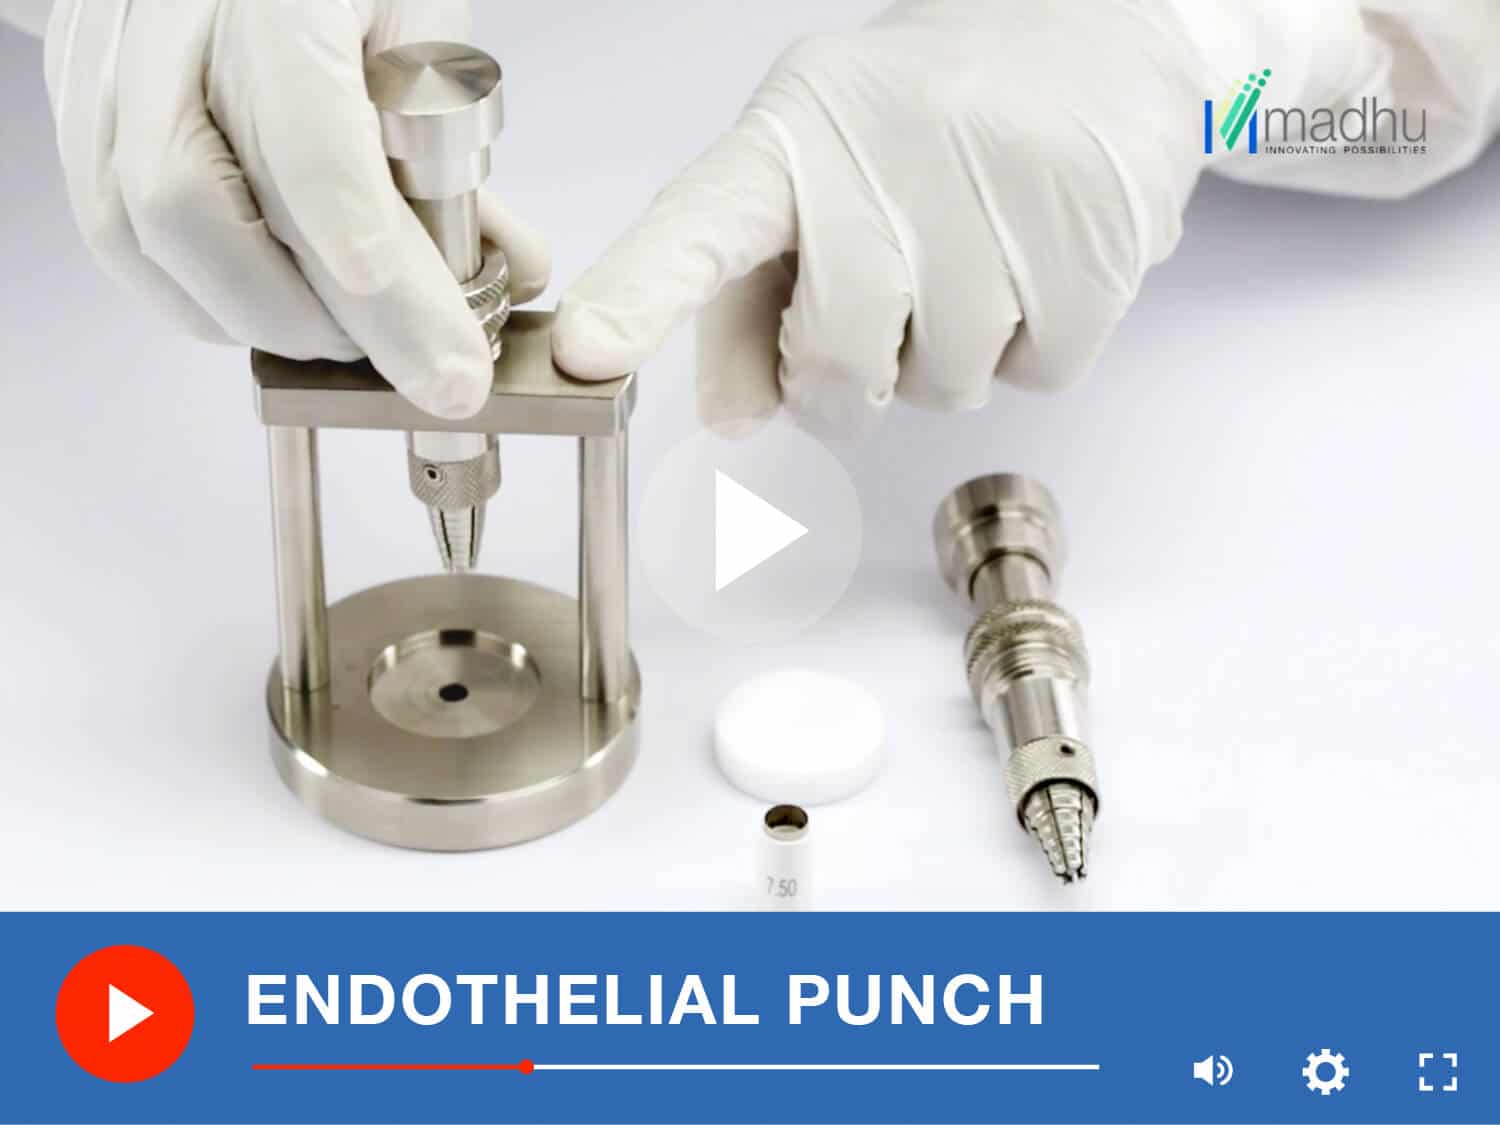 ENDOTHELIAL PUNCH